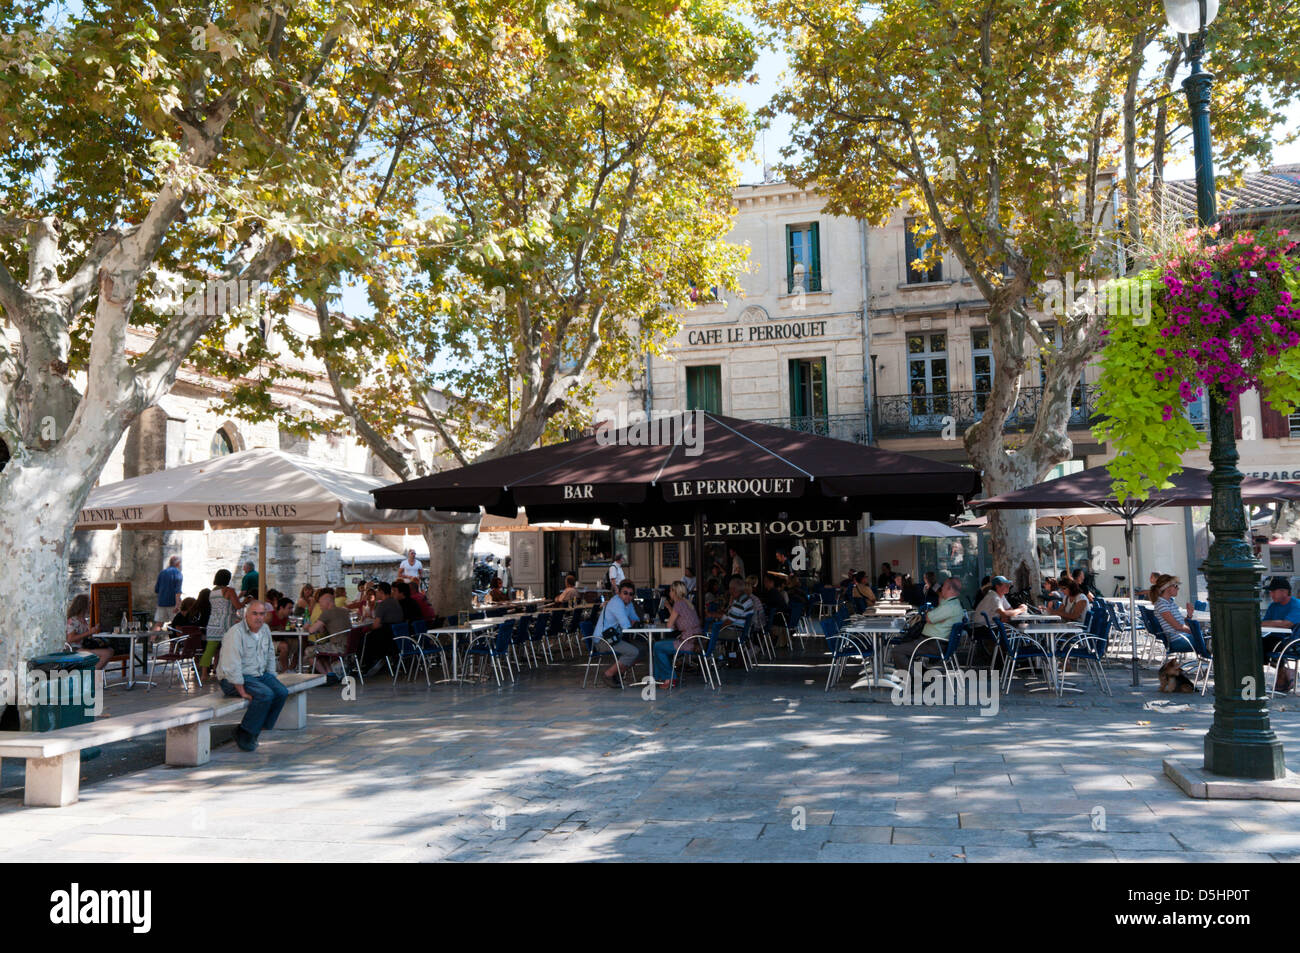 People sitting at cafe tables under trees in a square in the old town of Aigues-Mortes. Stock Photo